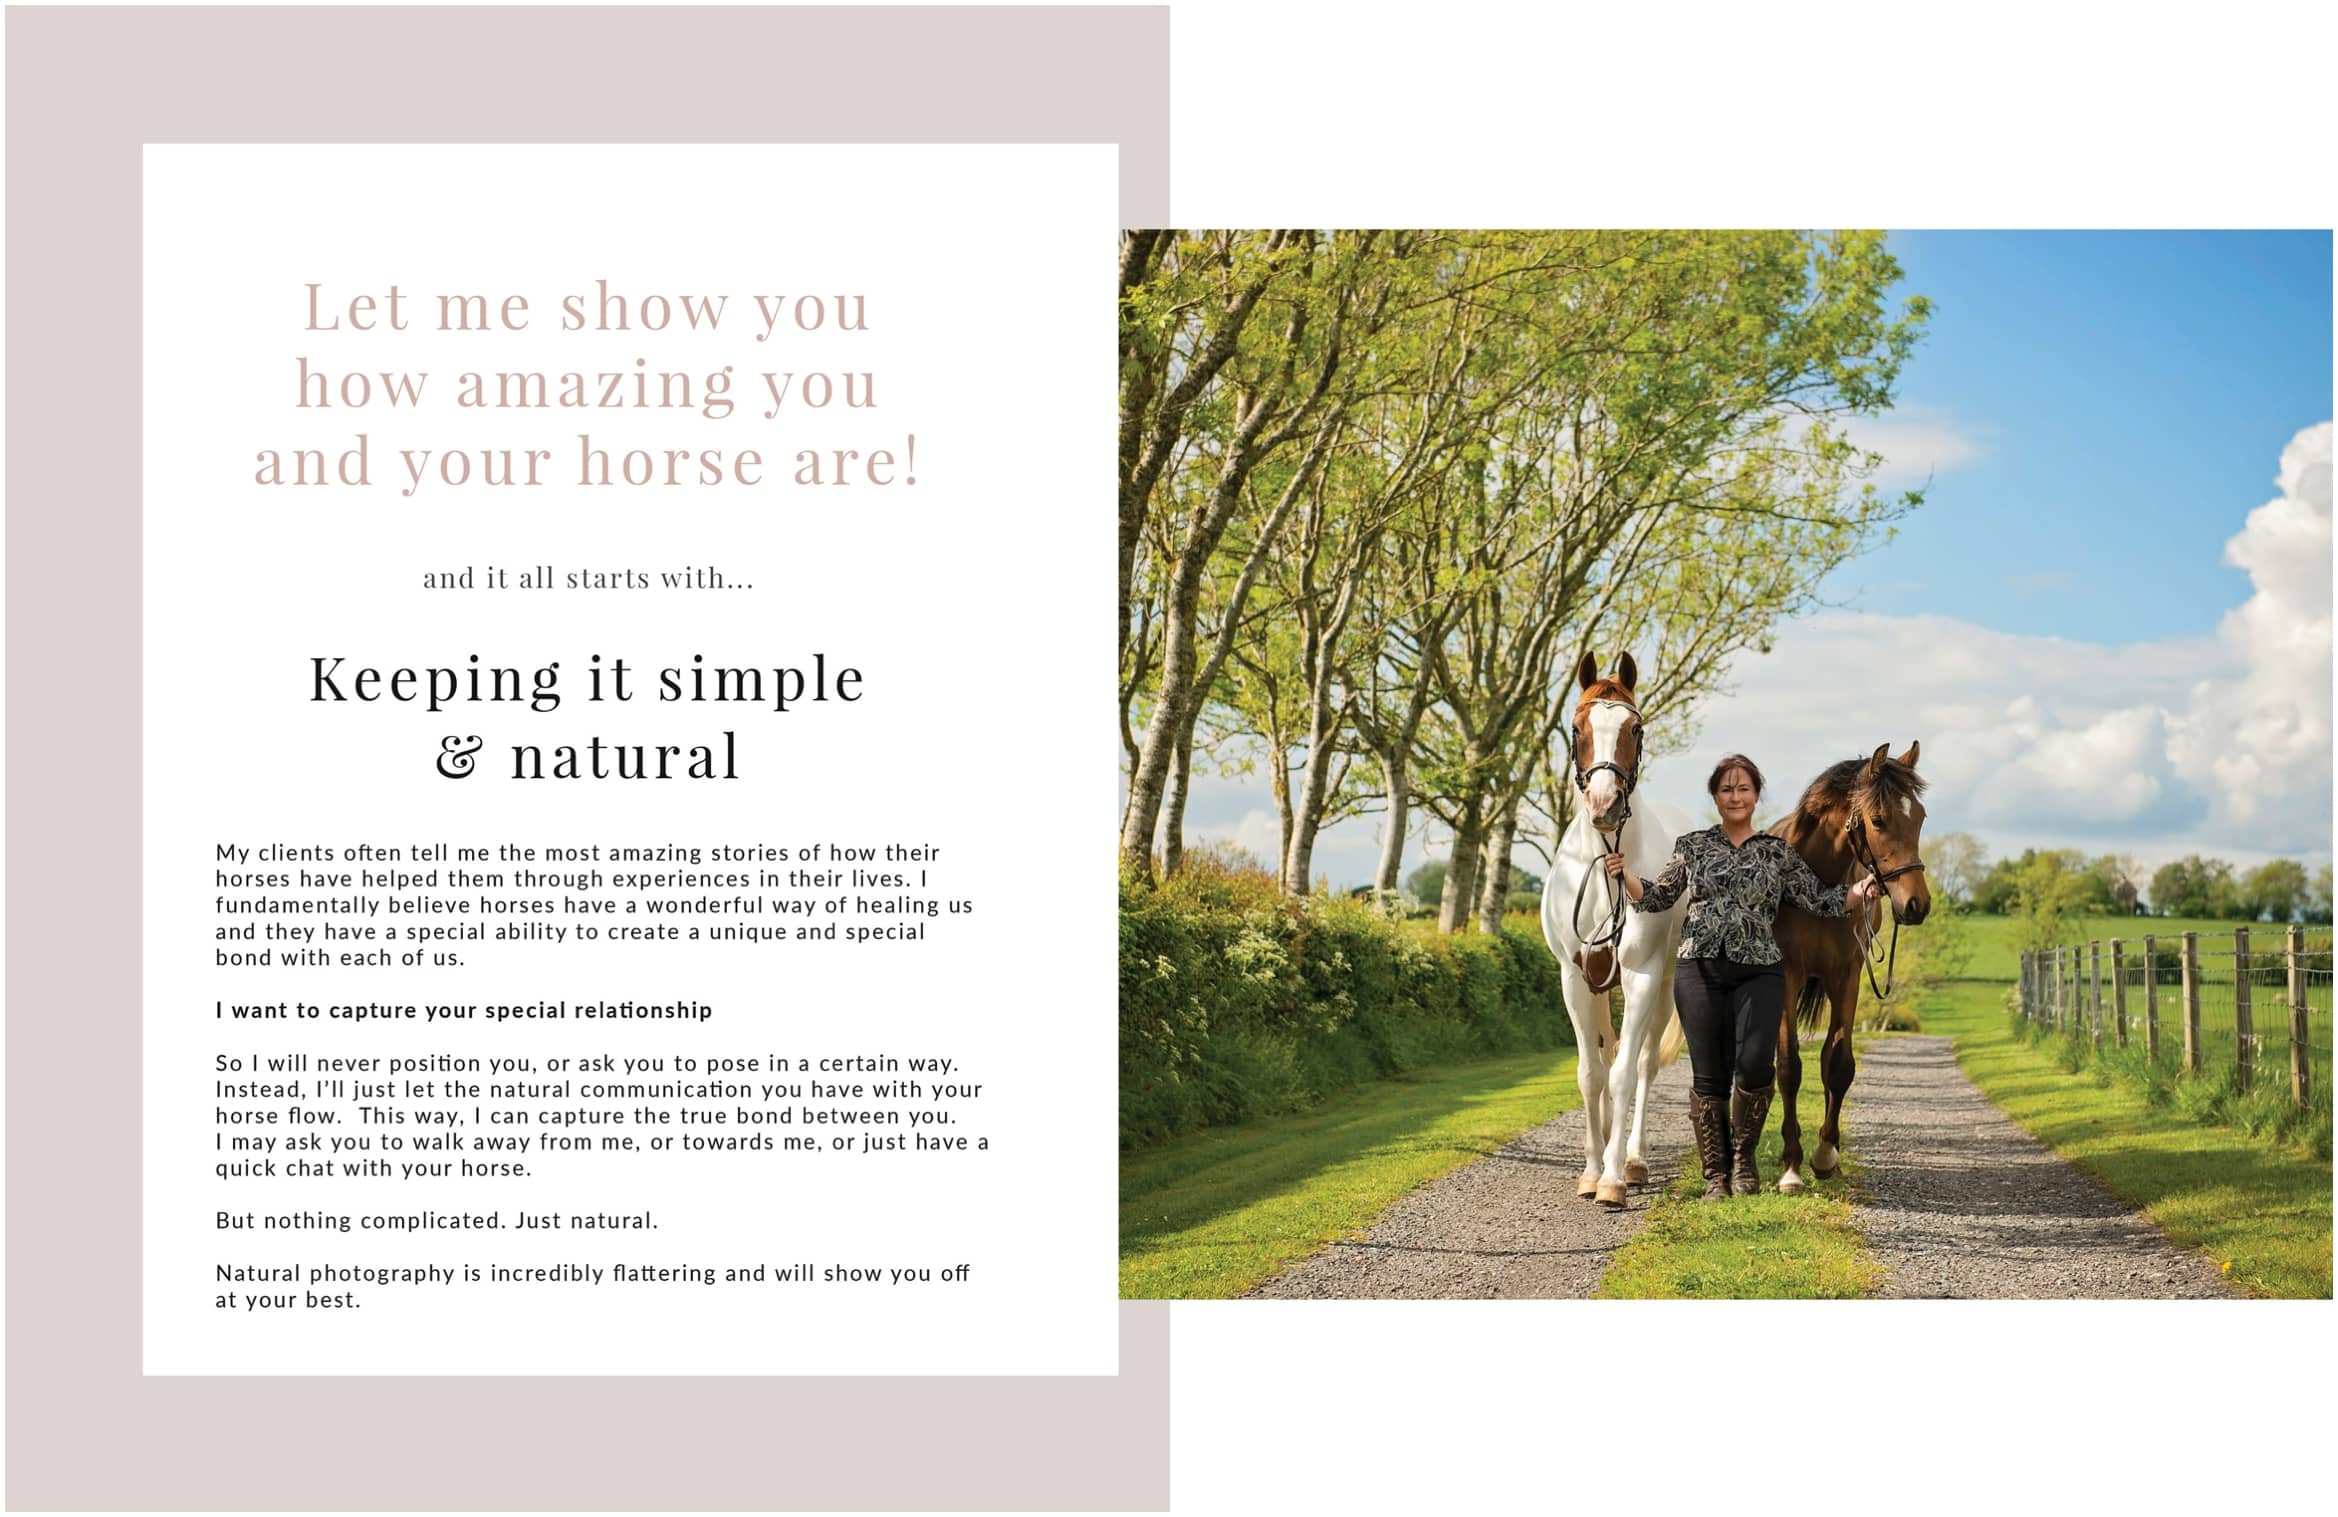 How a professional equine photoshoot can make you and your horse look amazing!